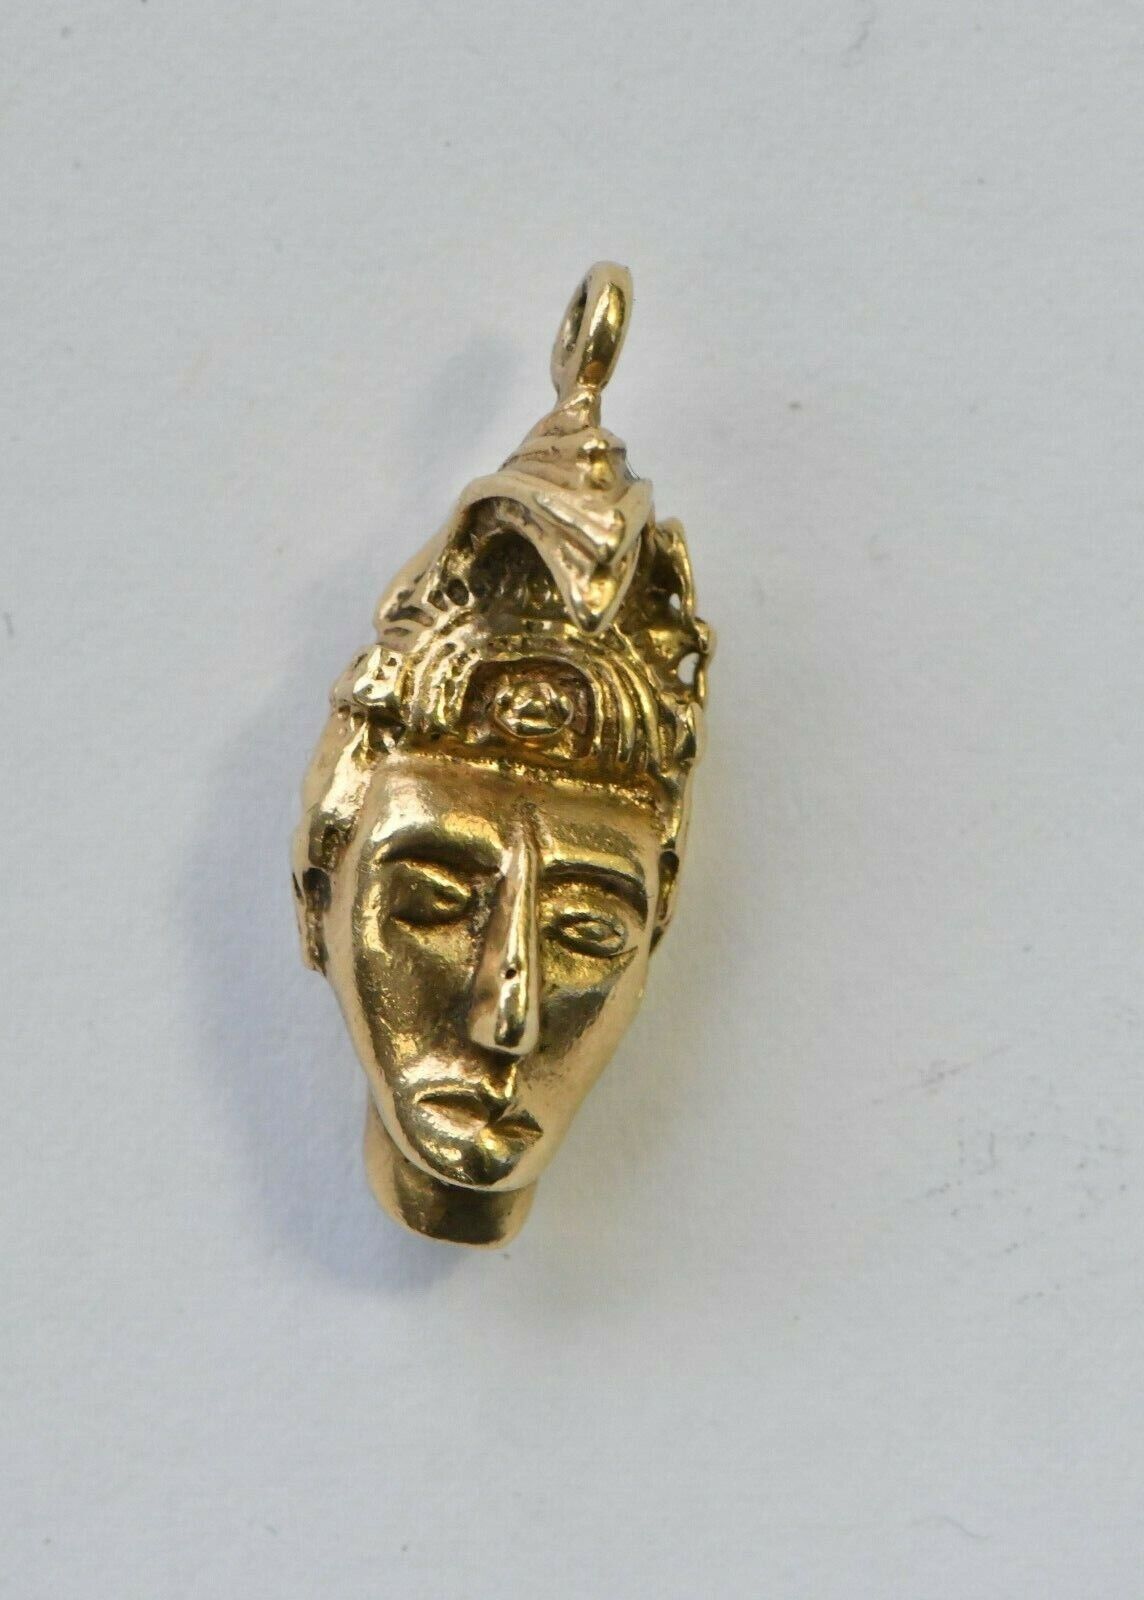 Vintage 14kt Gold Pendant Charm Solid Aztec Mayan African Face 7.7 grams